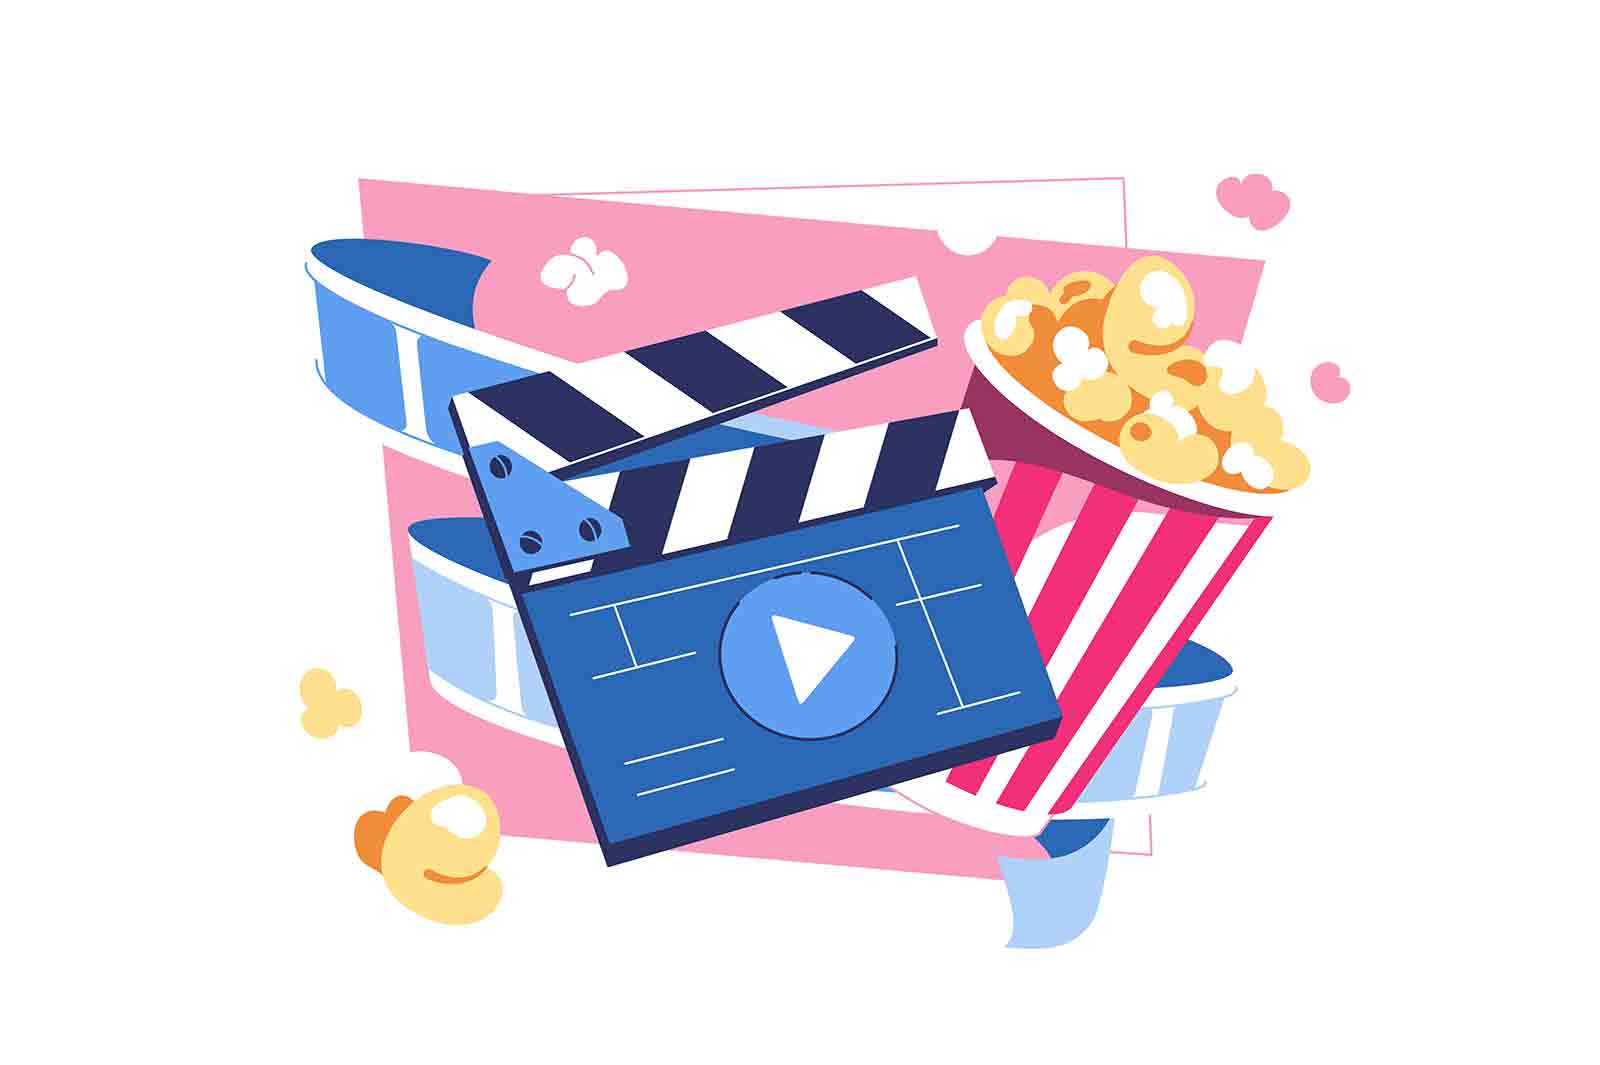 Clapperboard, popcorn bucket and filmstrip, film production vector illustration. Movie premiere show announcement flat style concept. Movie time